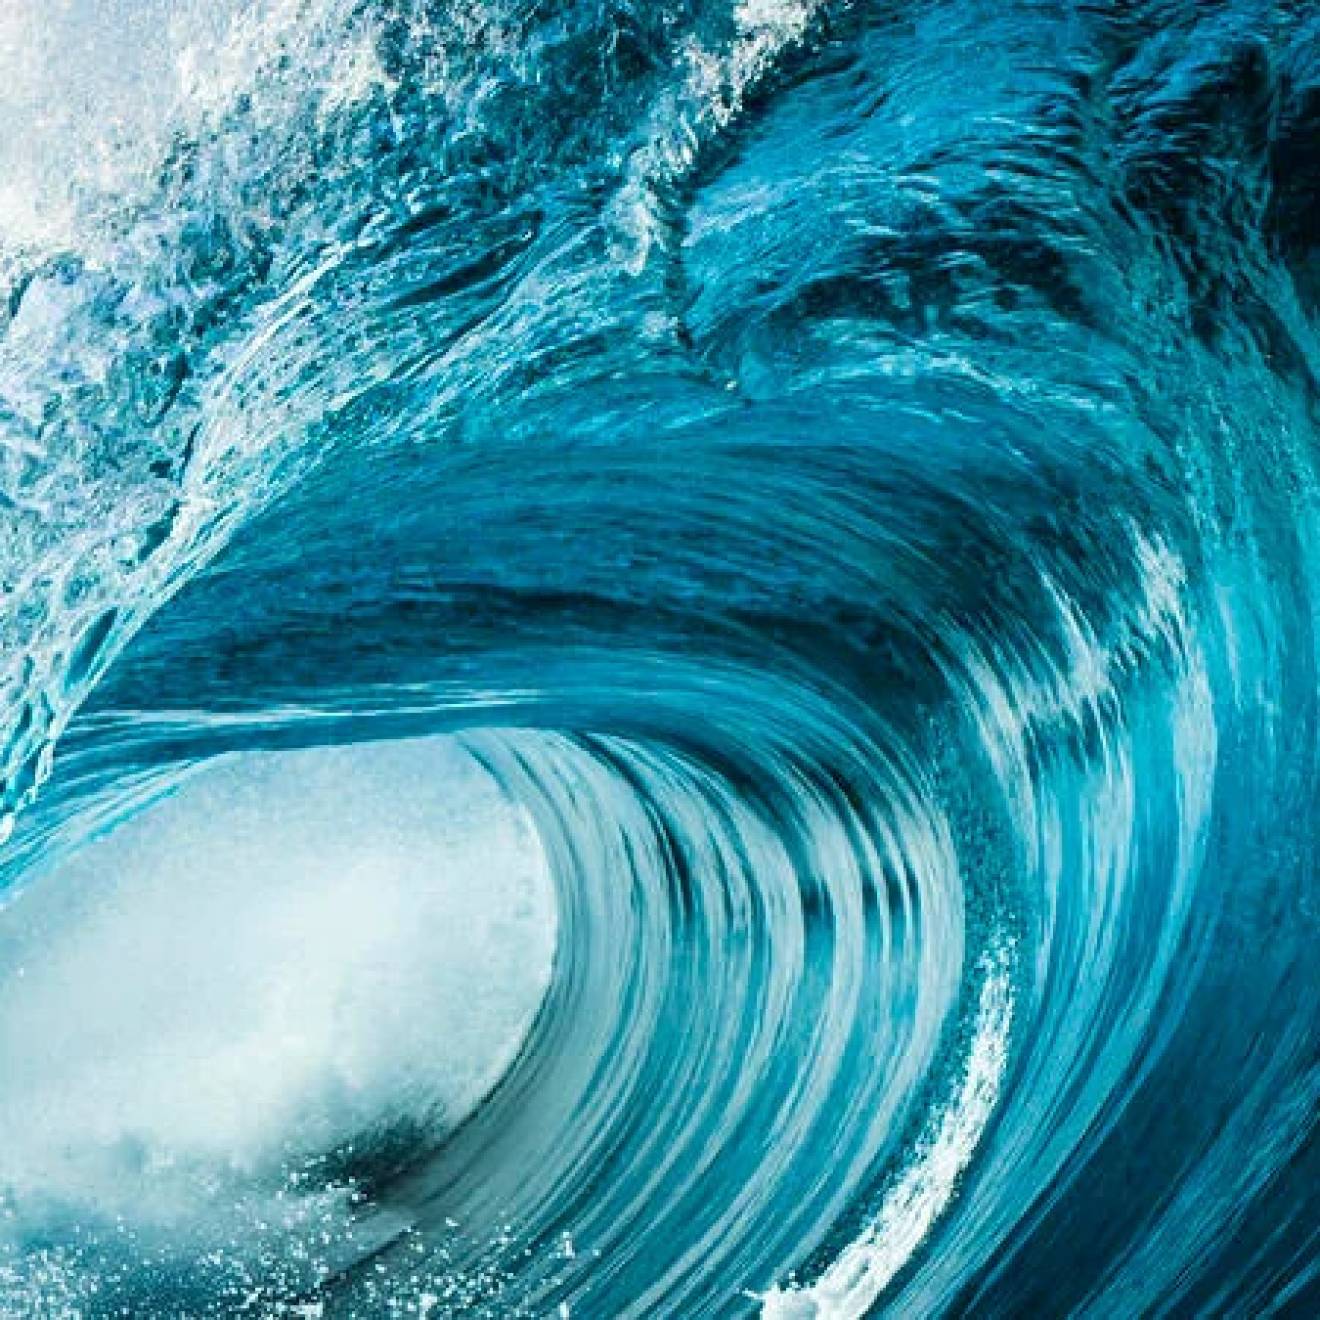 A very blue ocean wave about to crash, seen from the side